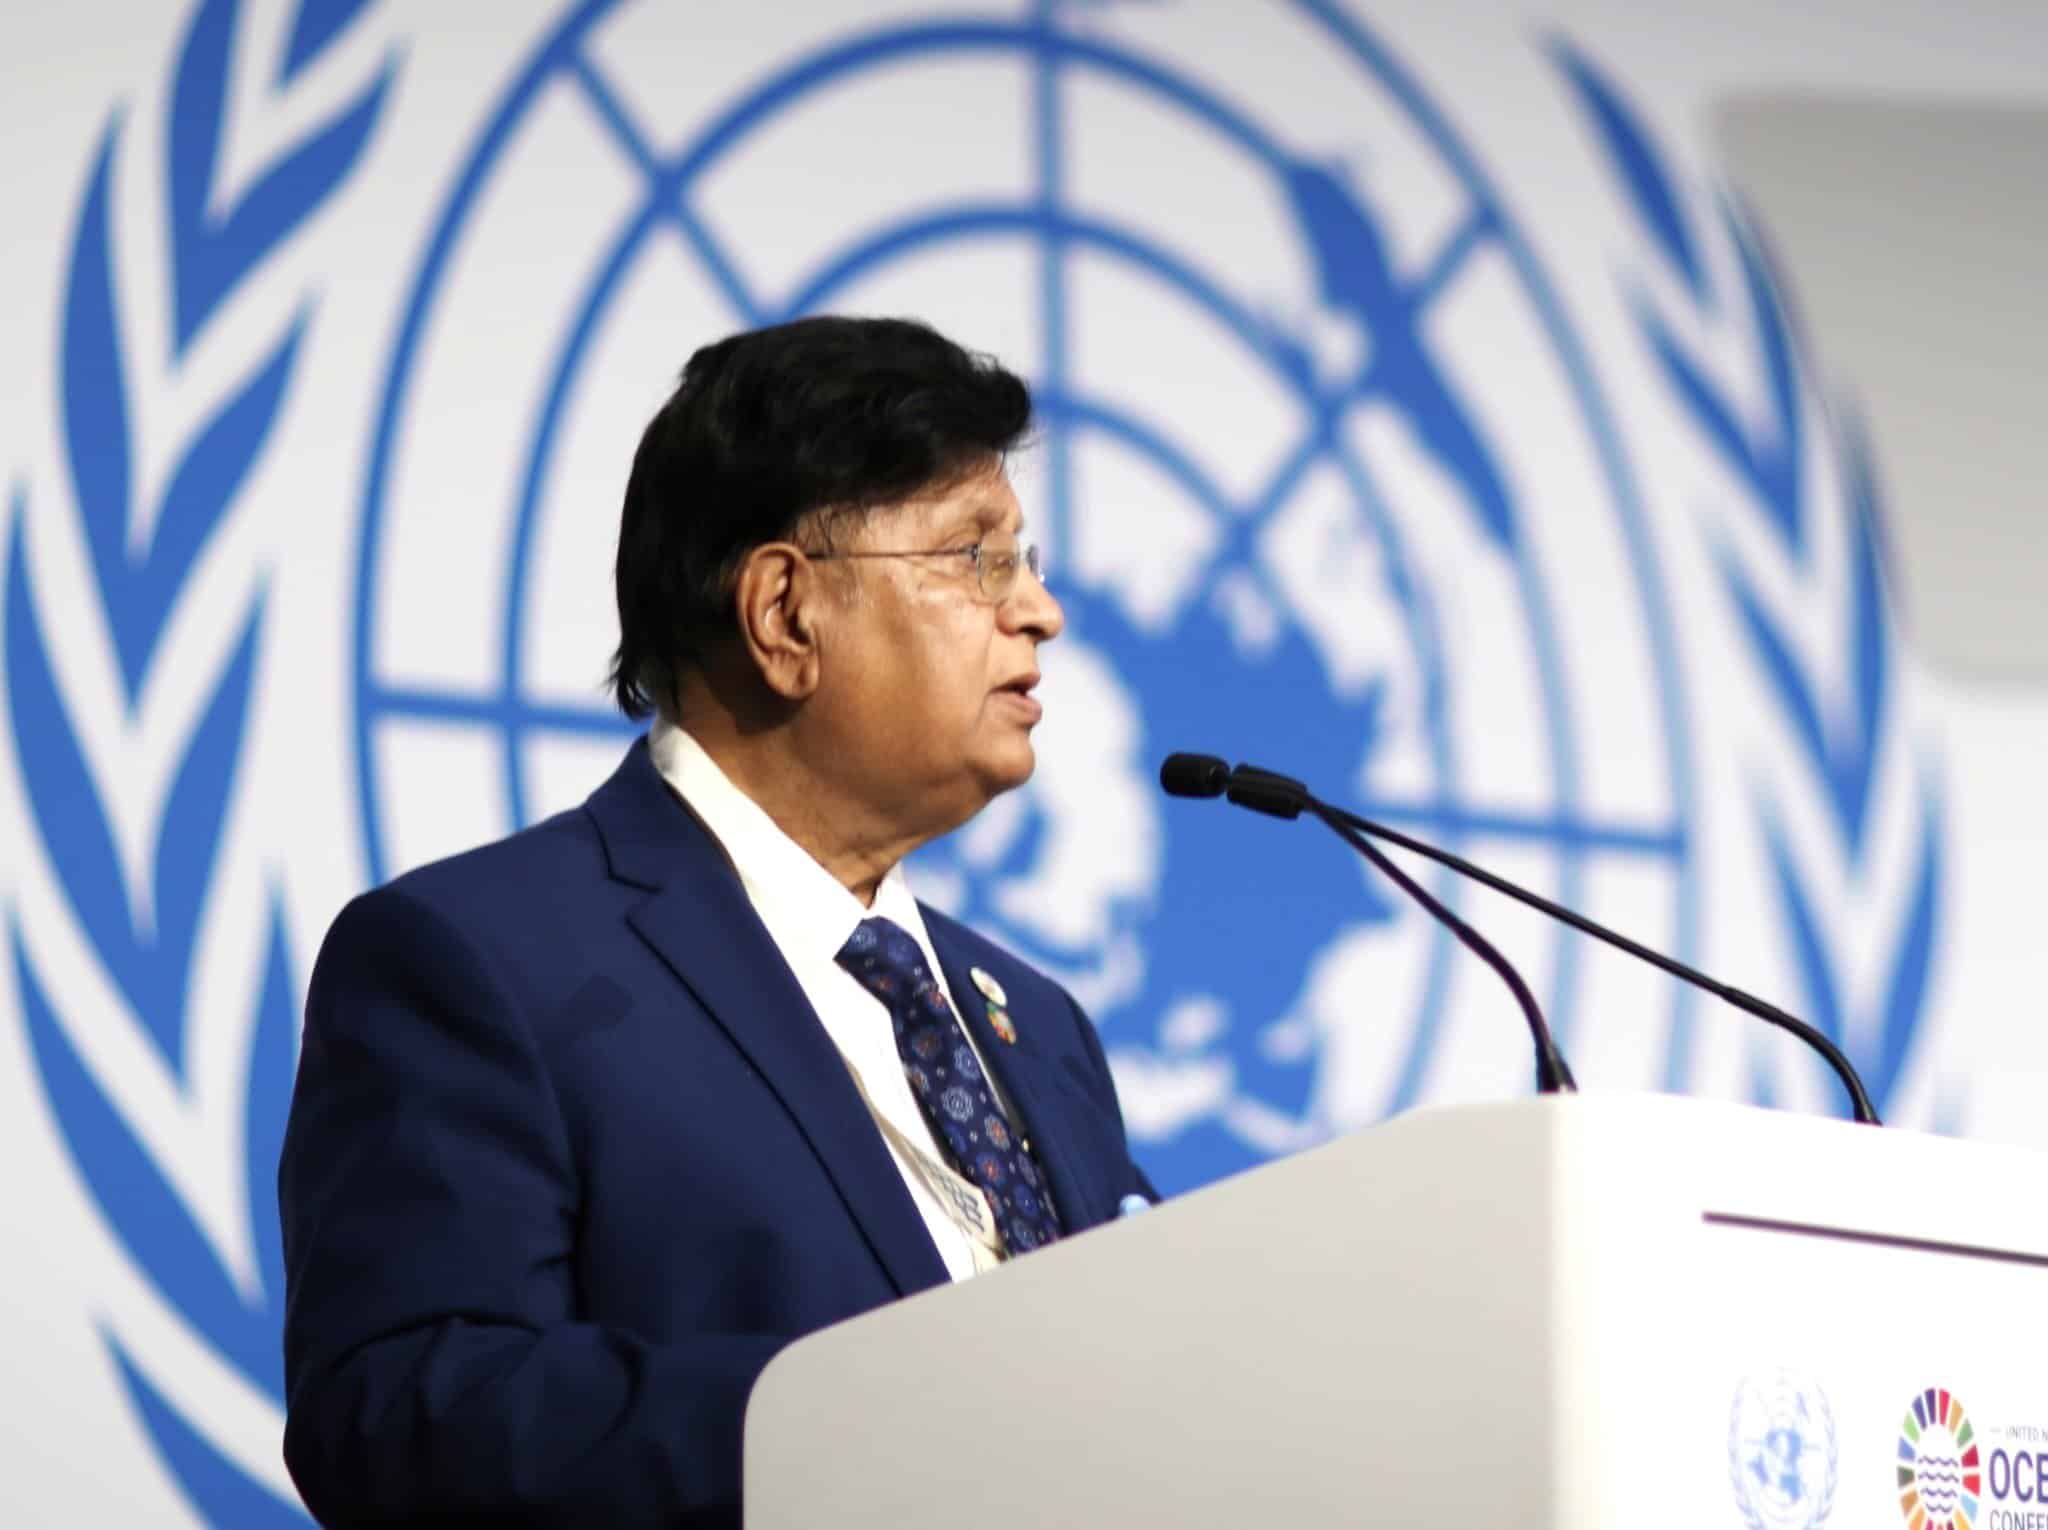 Bangladesh reaffirms commitment to achieve SDG-14 at UN Conference